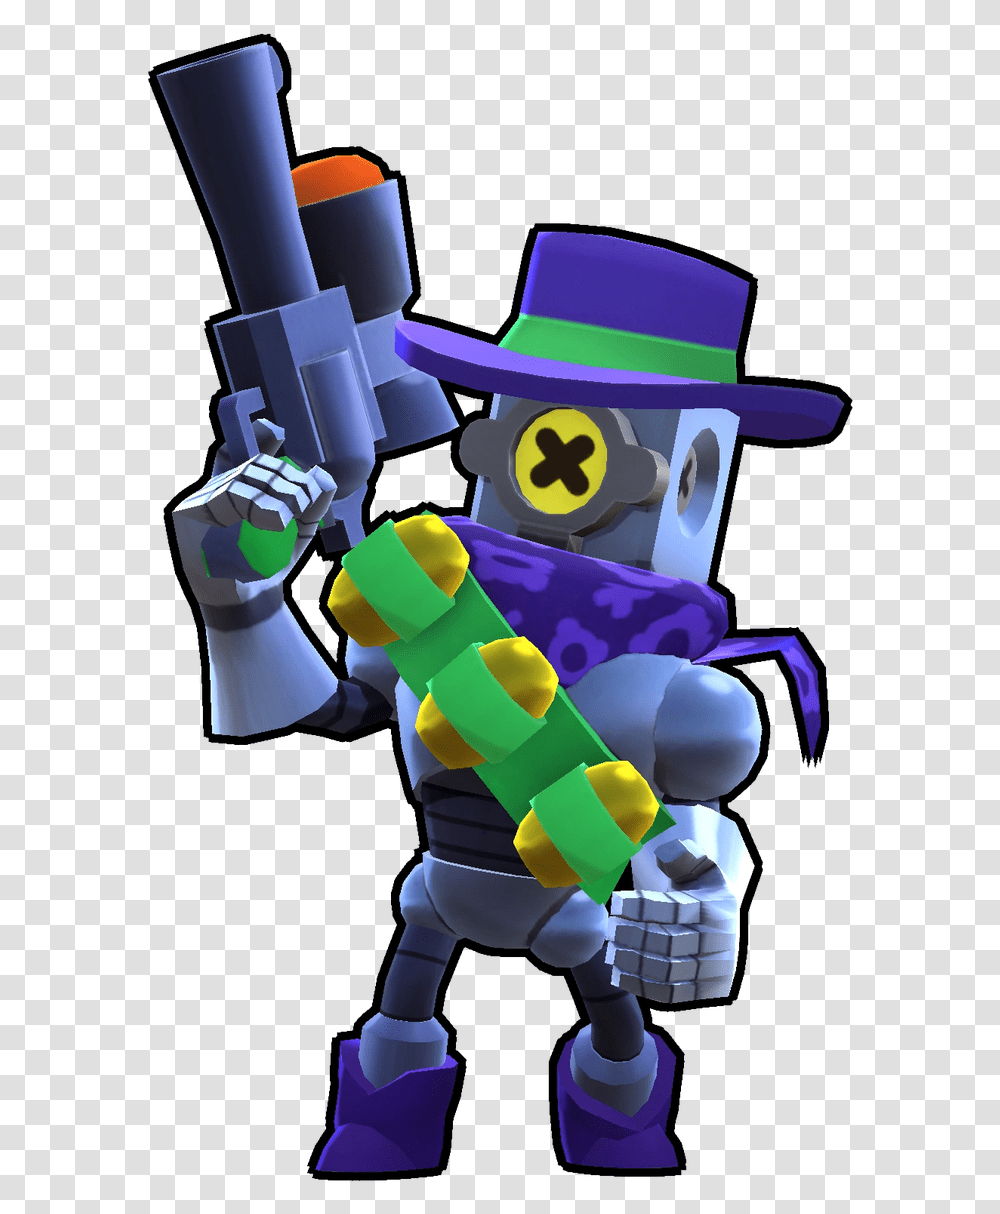 Ricochet From Brawl Stars, Toy, Pac Man, Robot, Outdoors Transparent Png